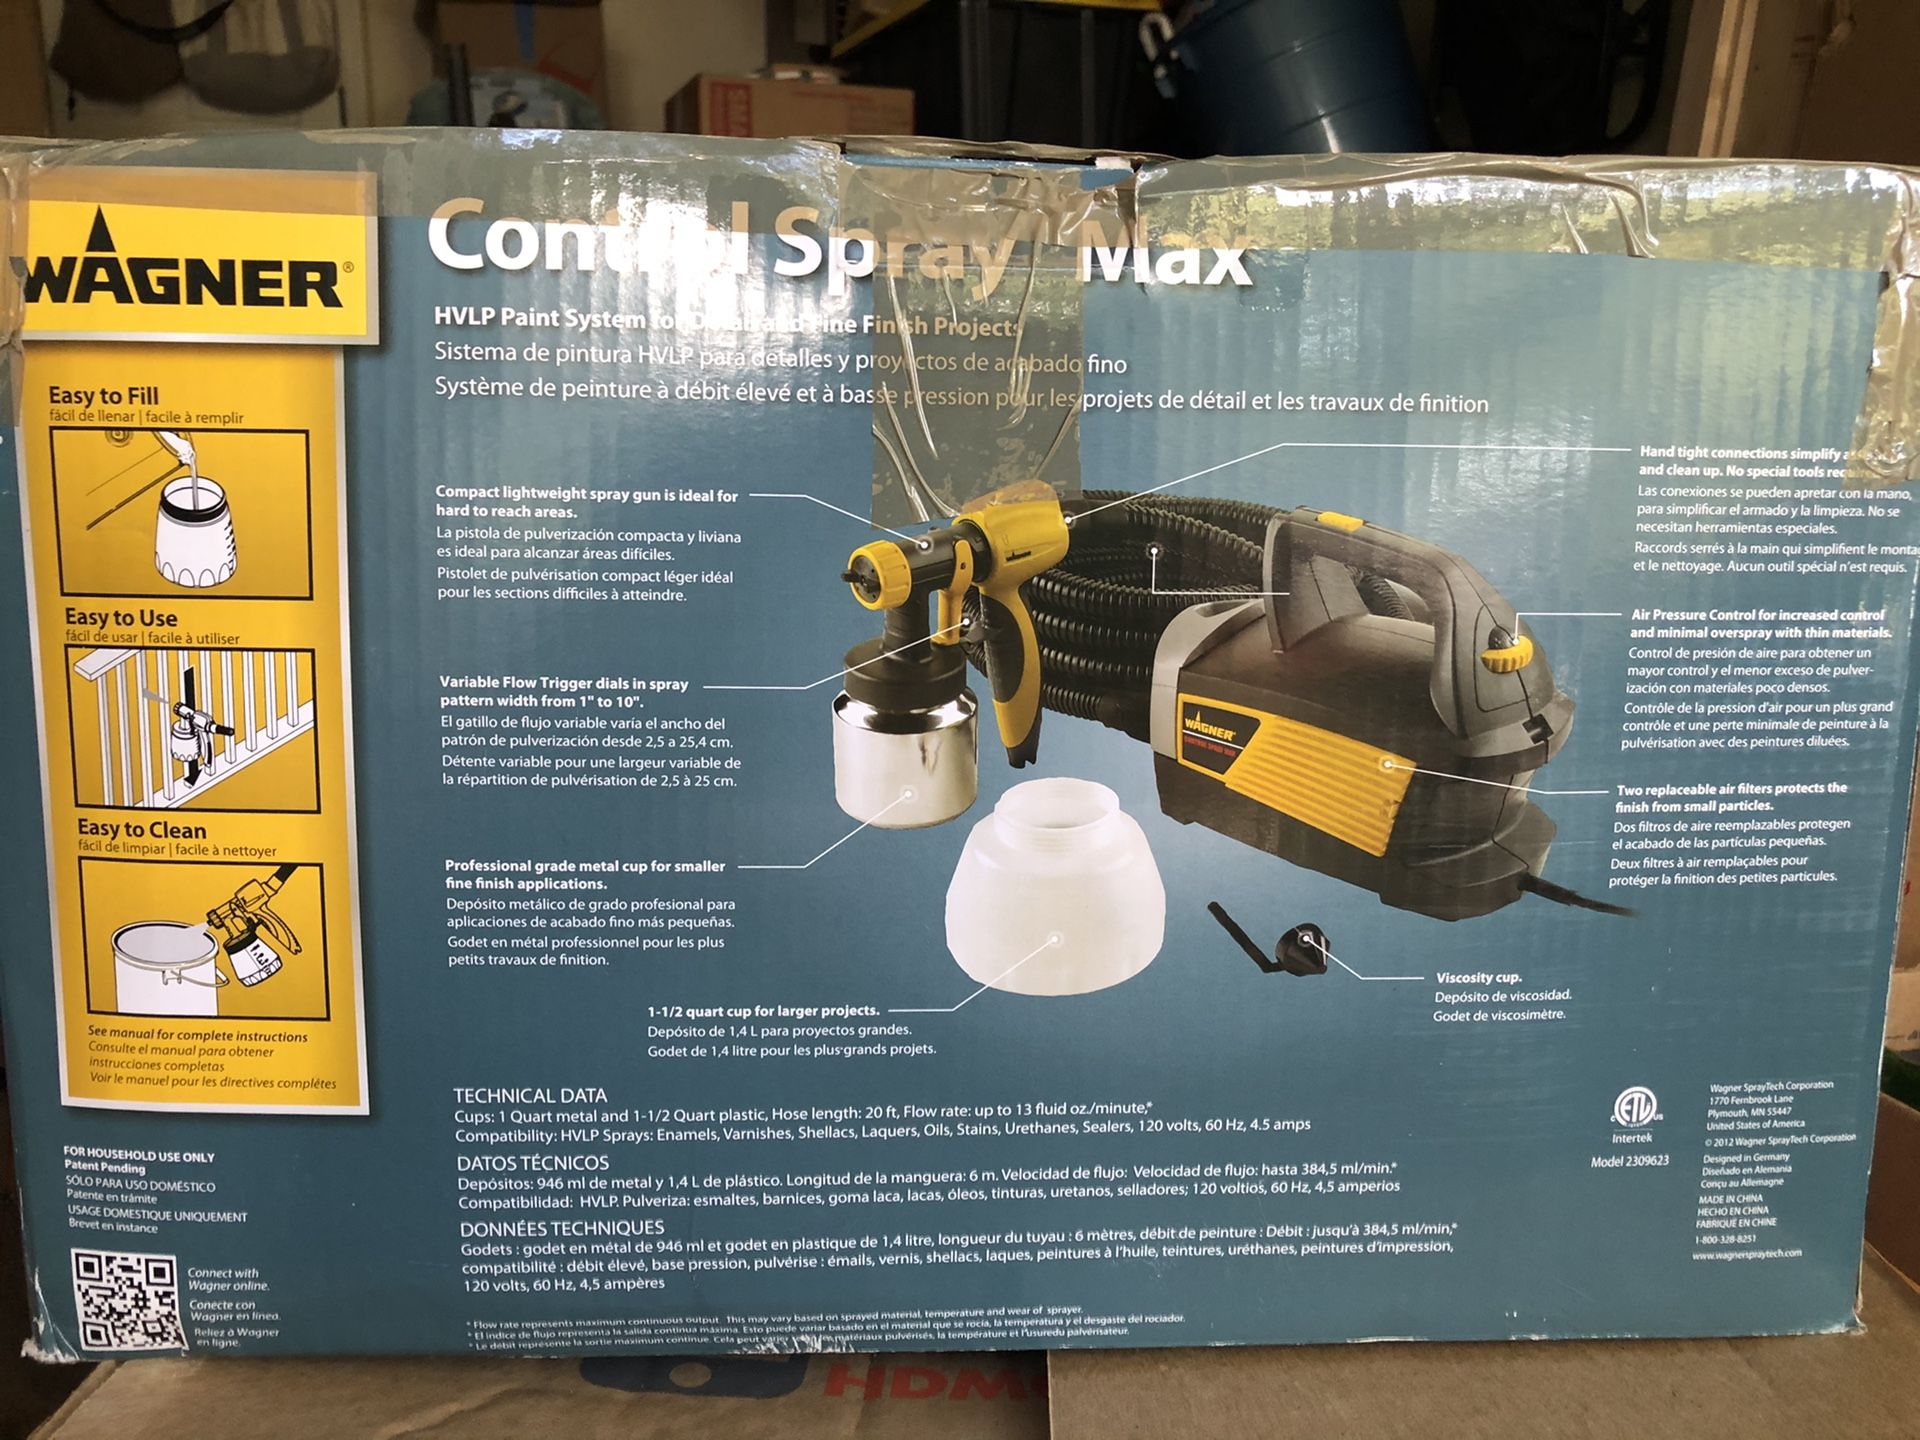 Wagner power painter- Control Spray Max